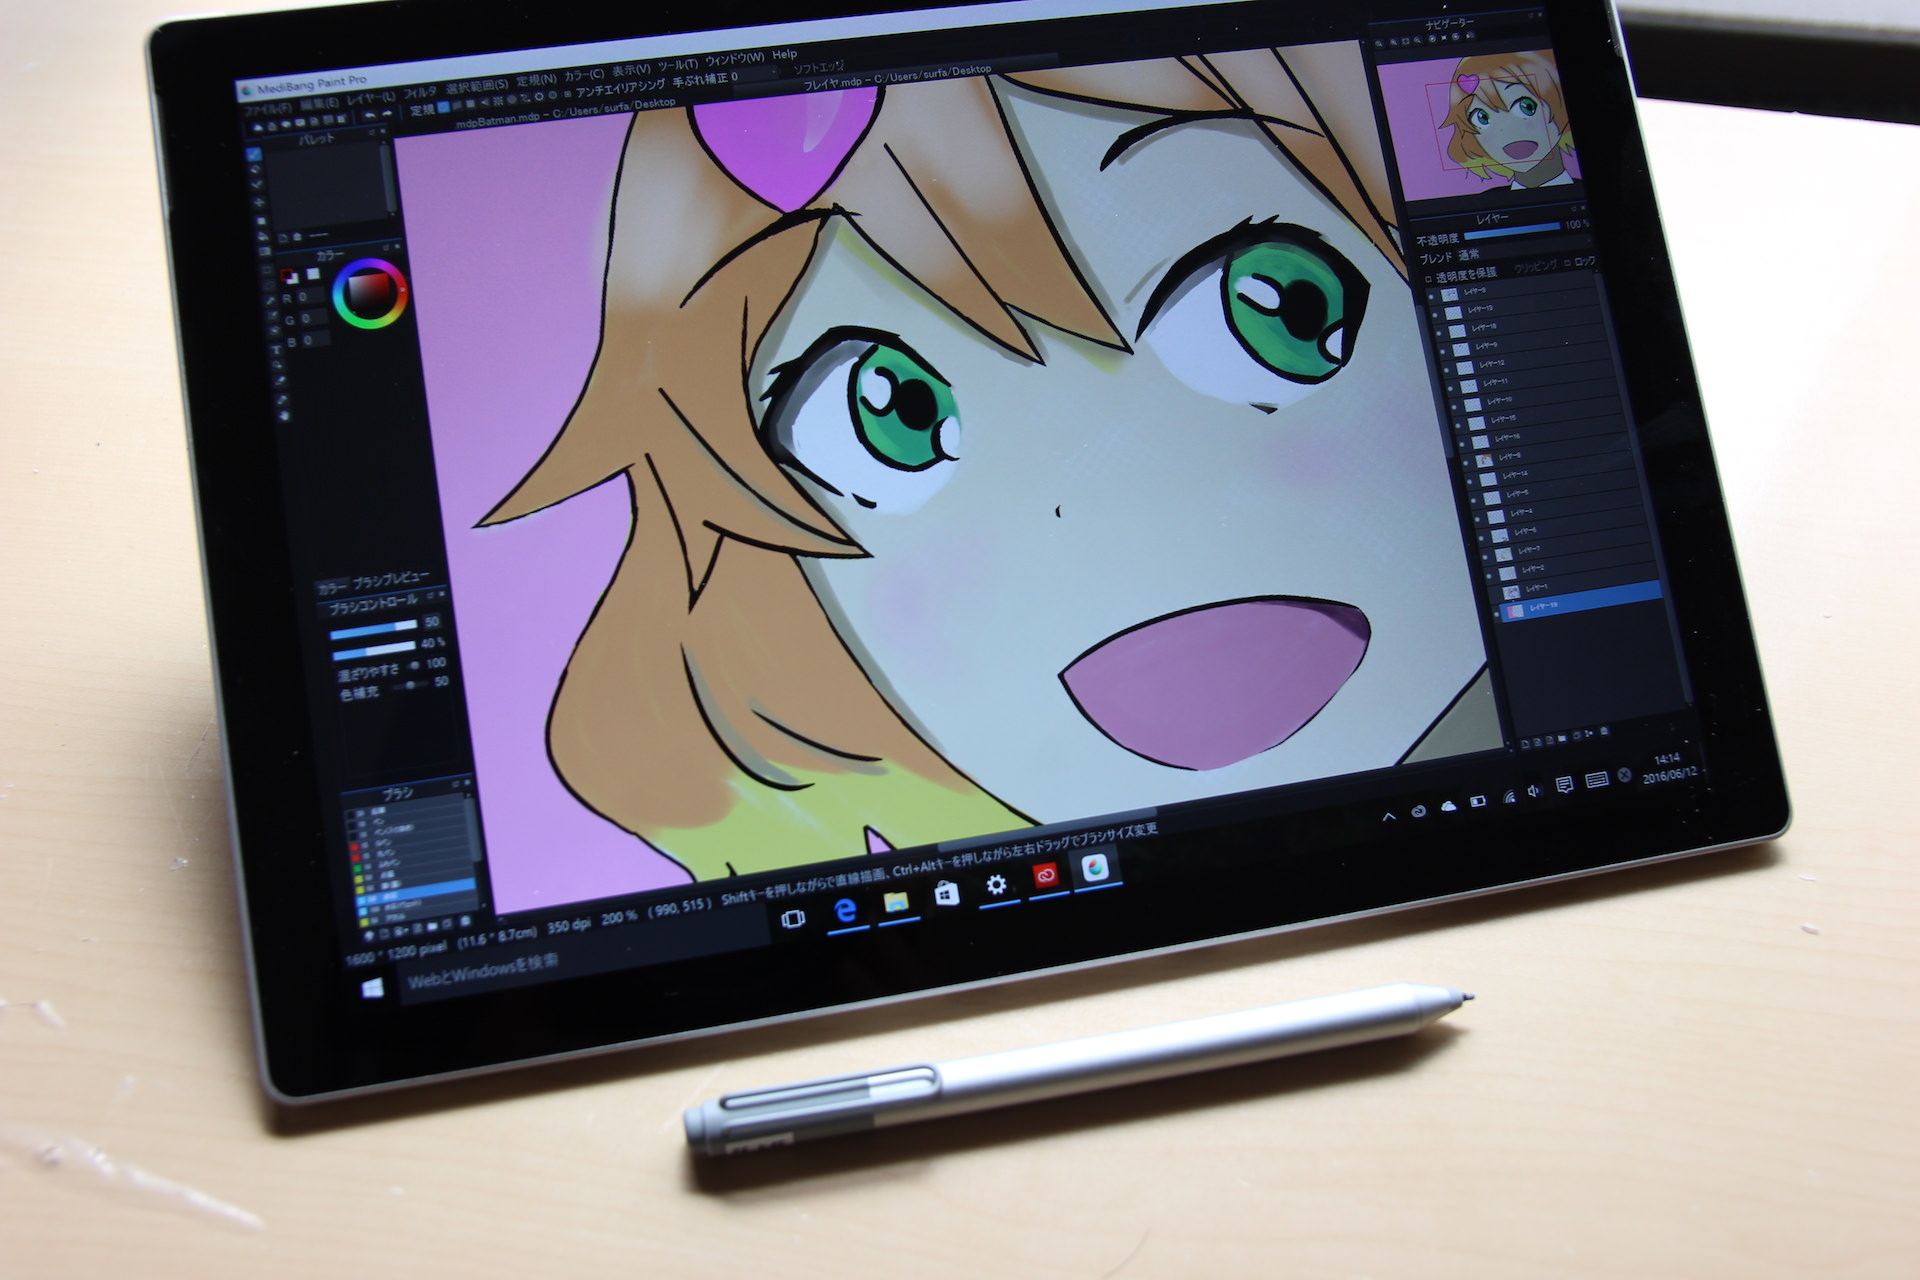 surface 絵 を 描く アプリ